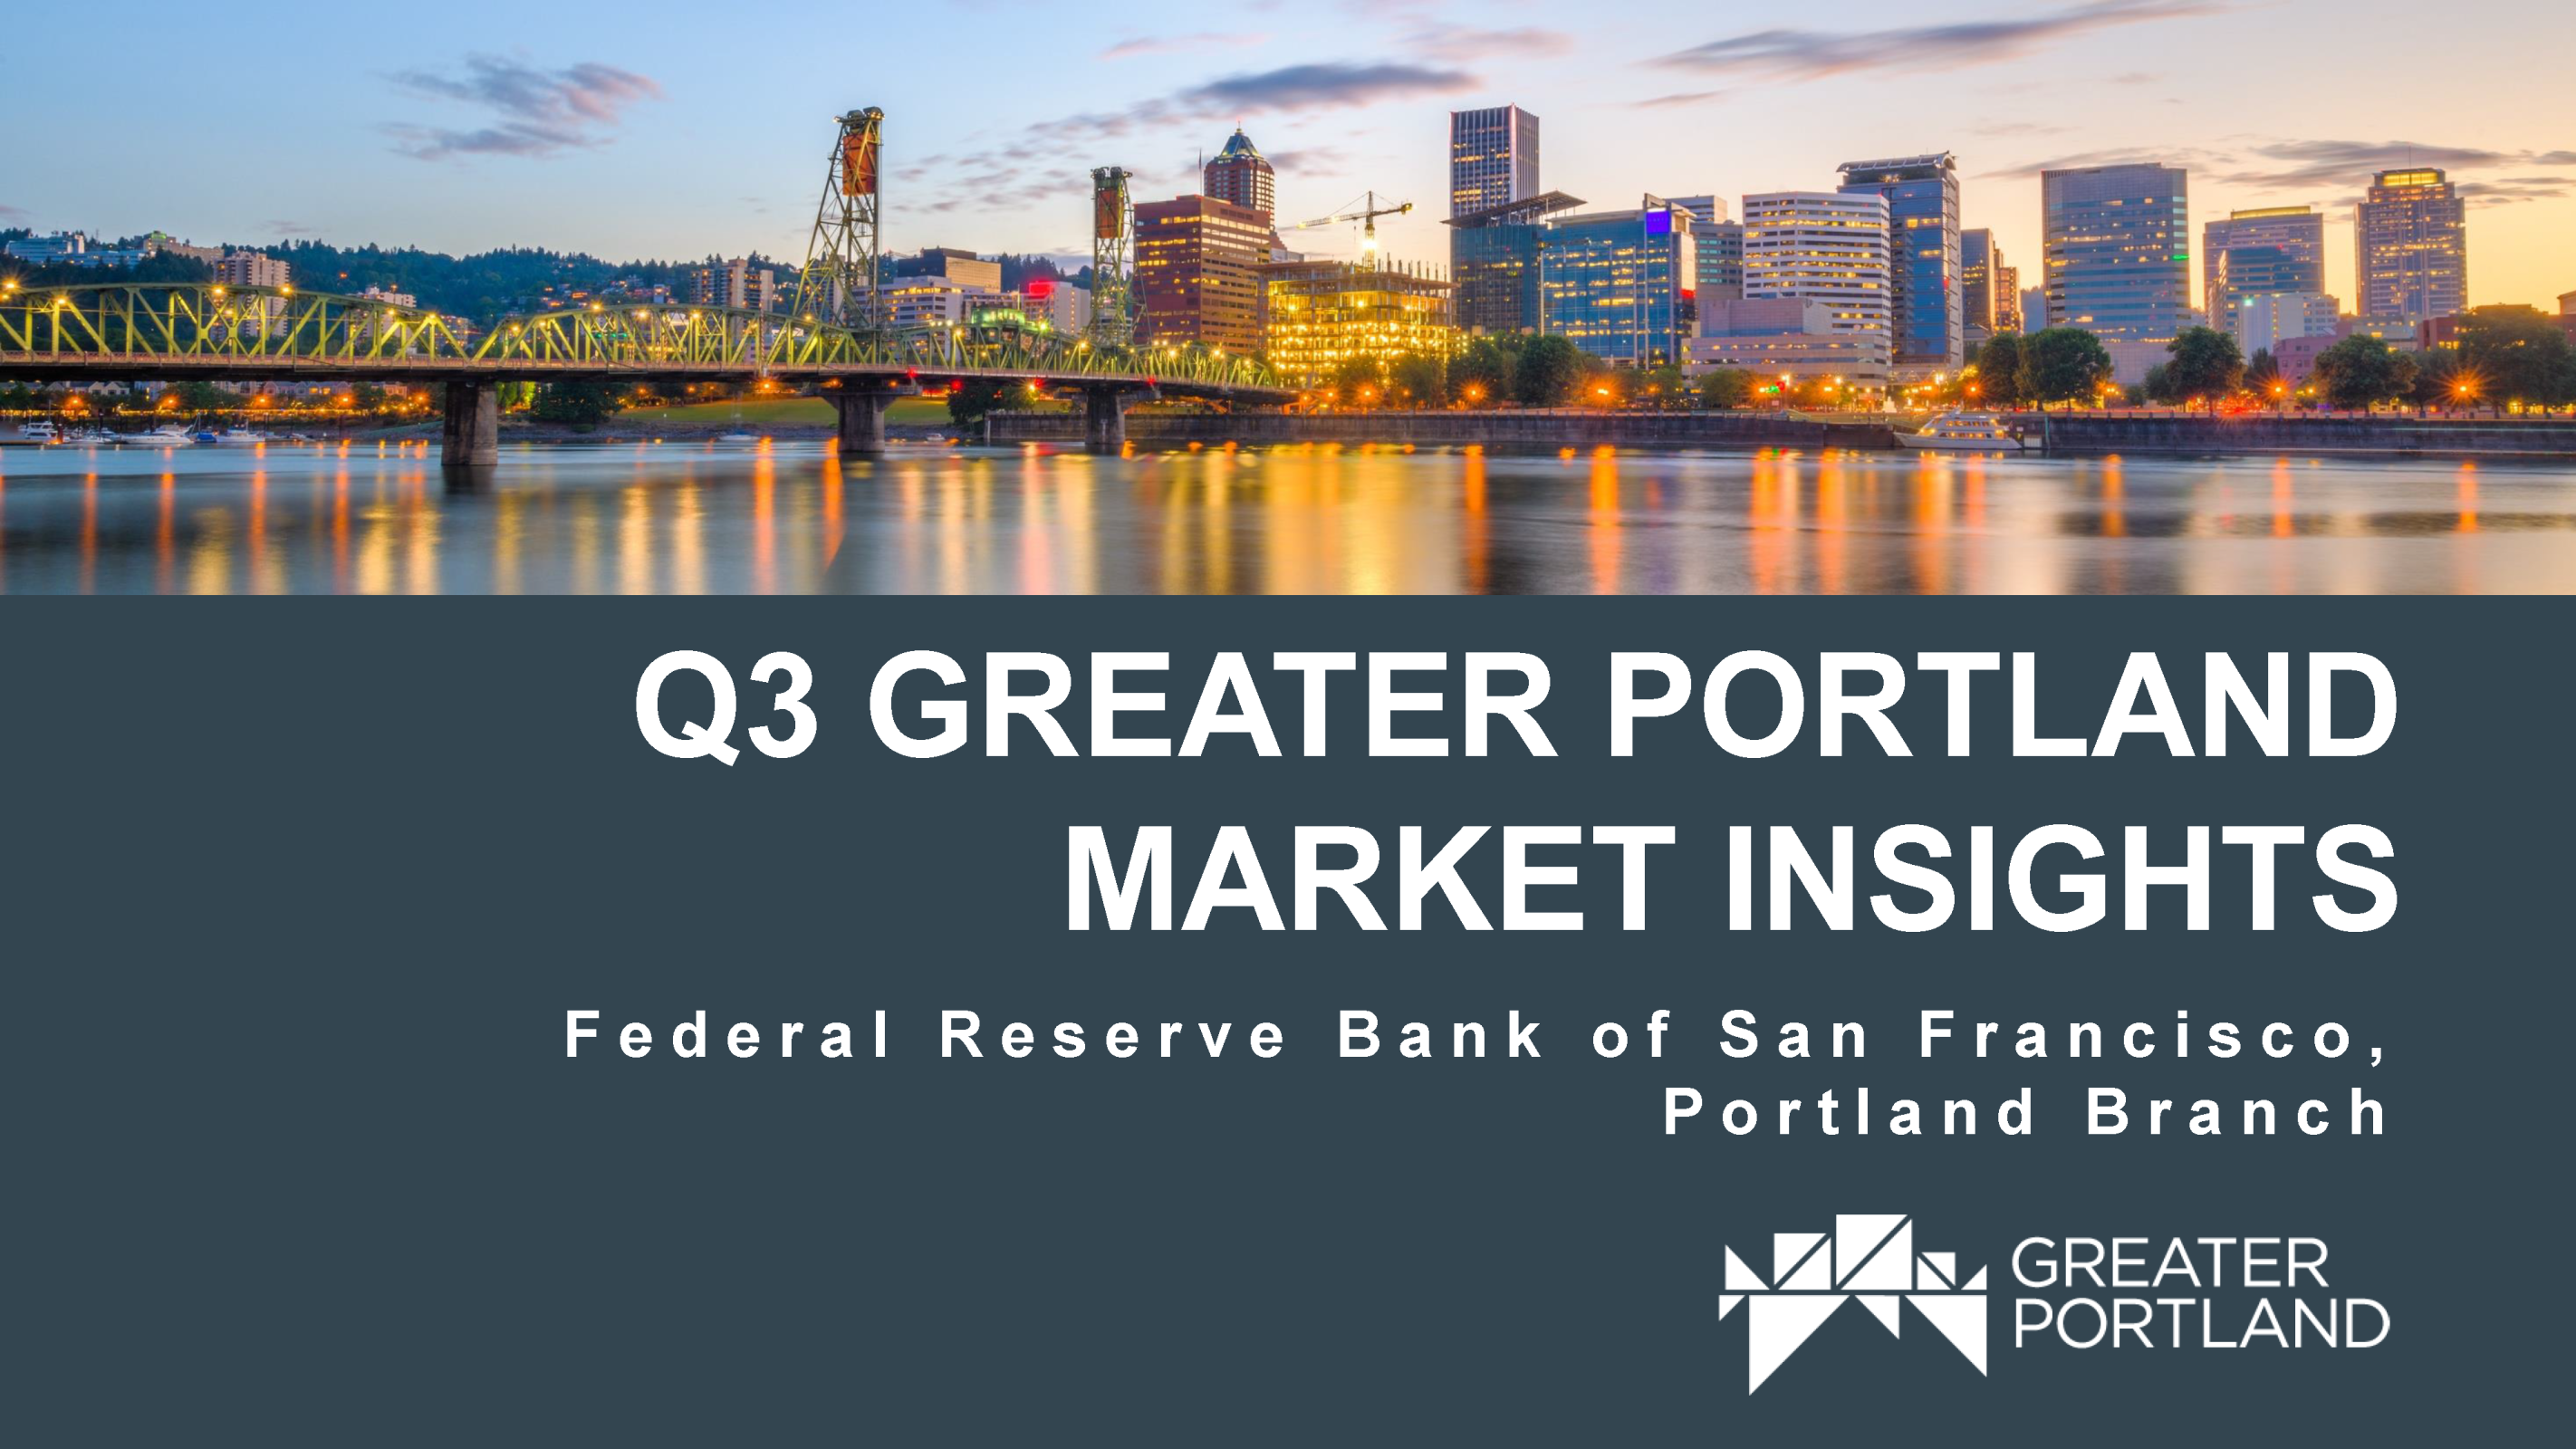 GPI releases Q3 Greater Portland Market Insights Report Photo